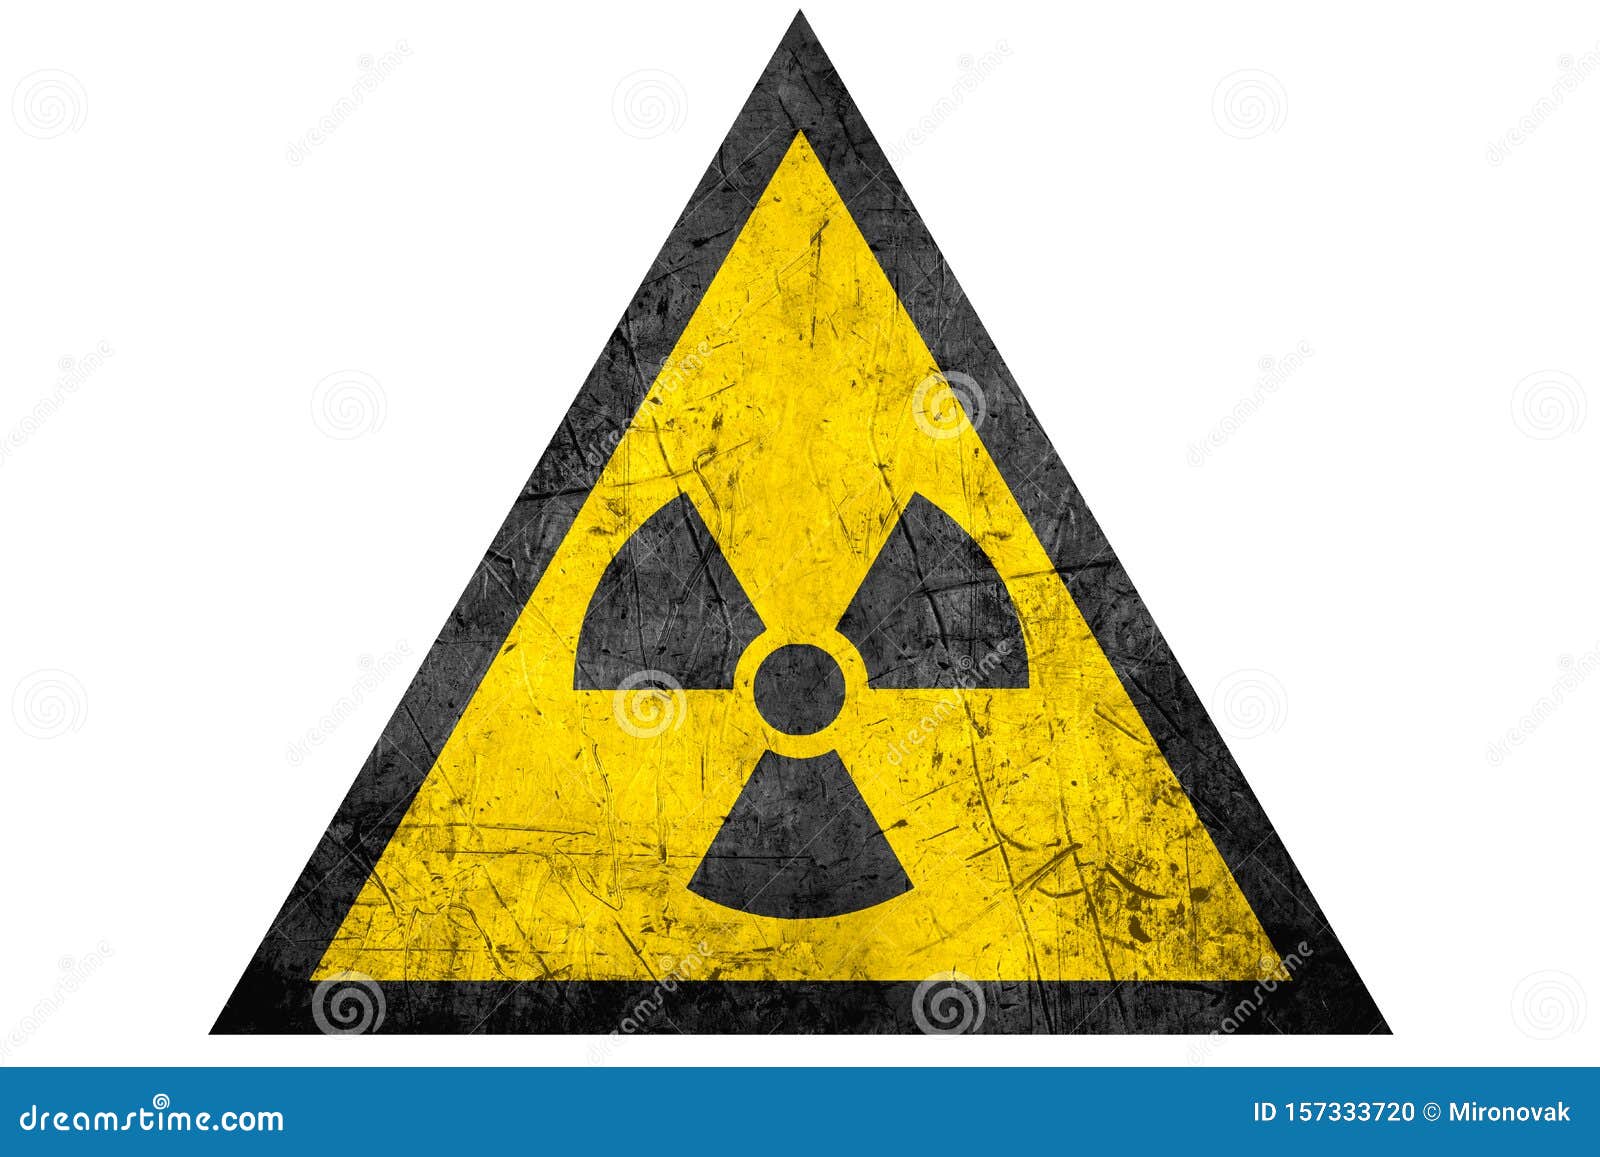 black radioactive sign in yellow riangle